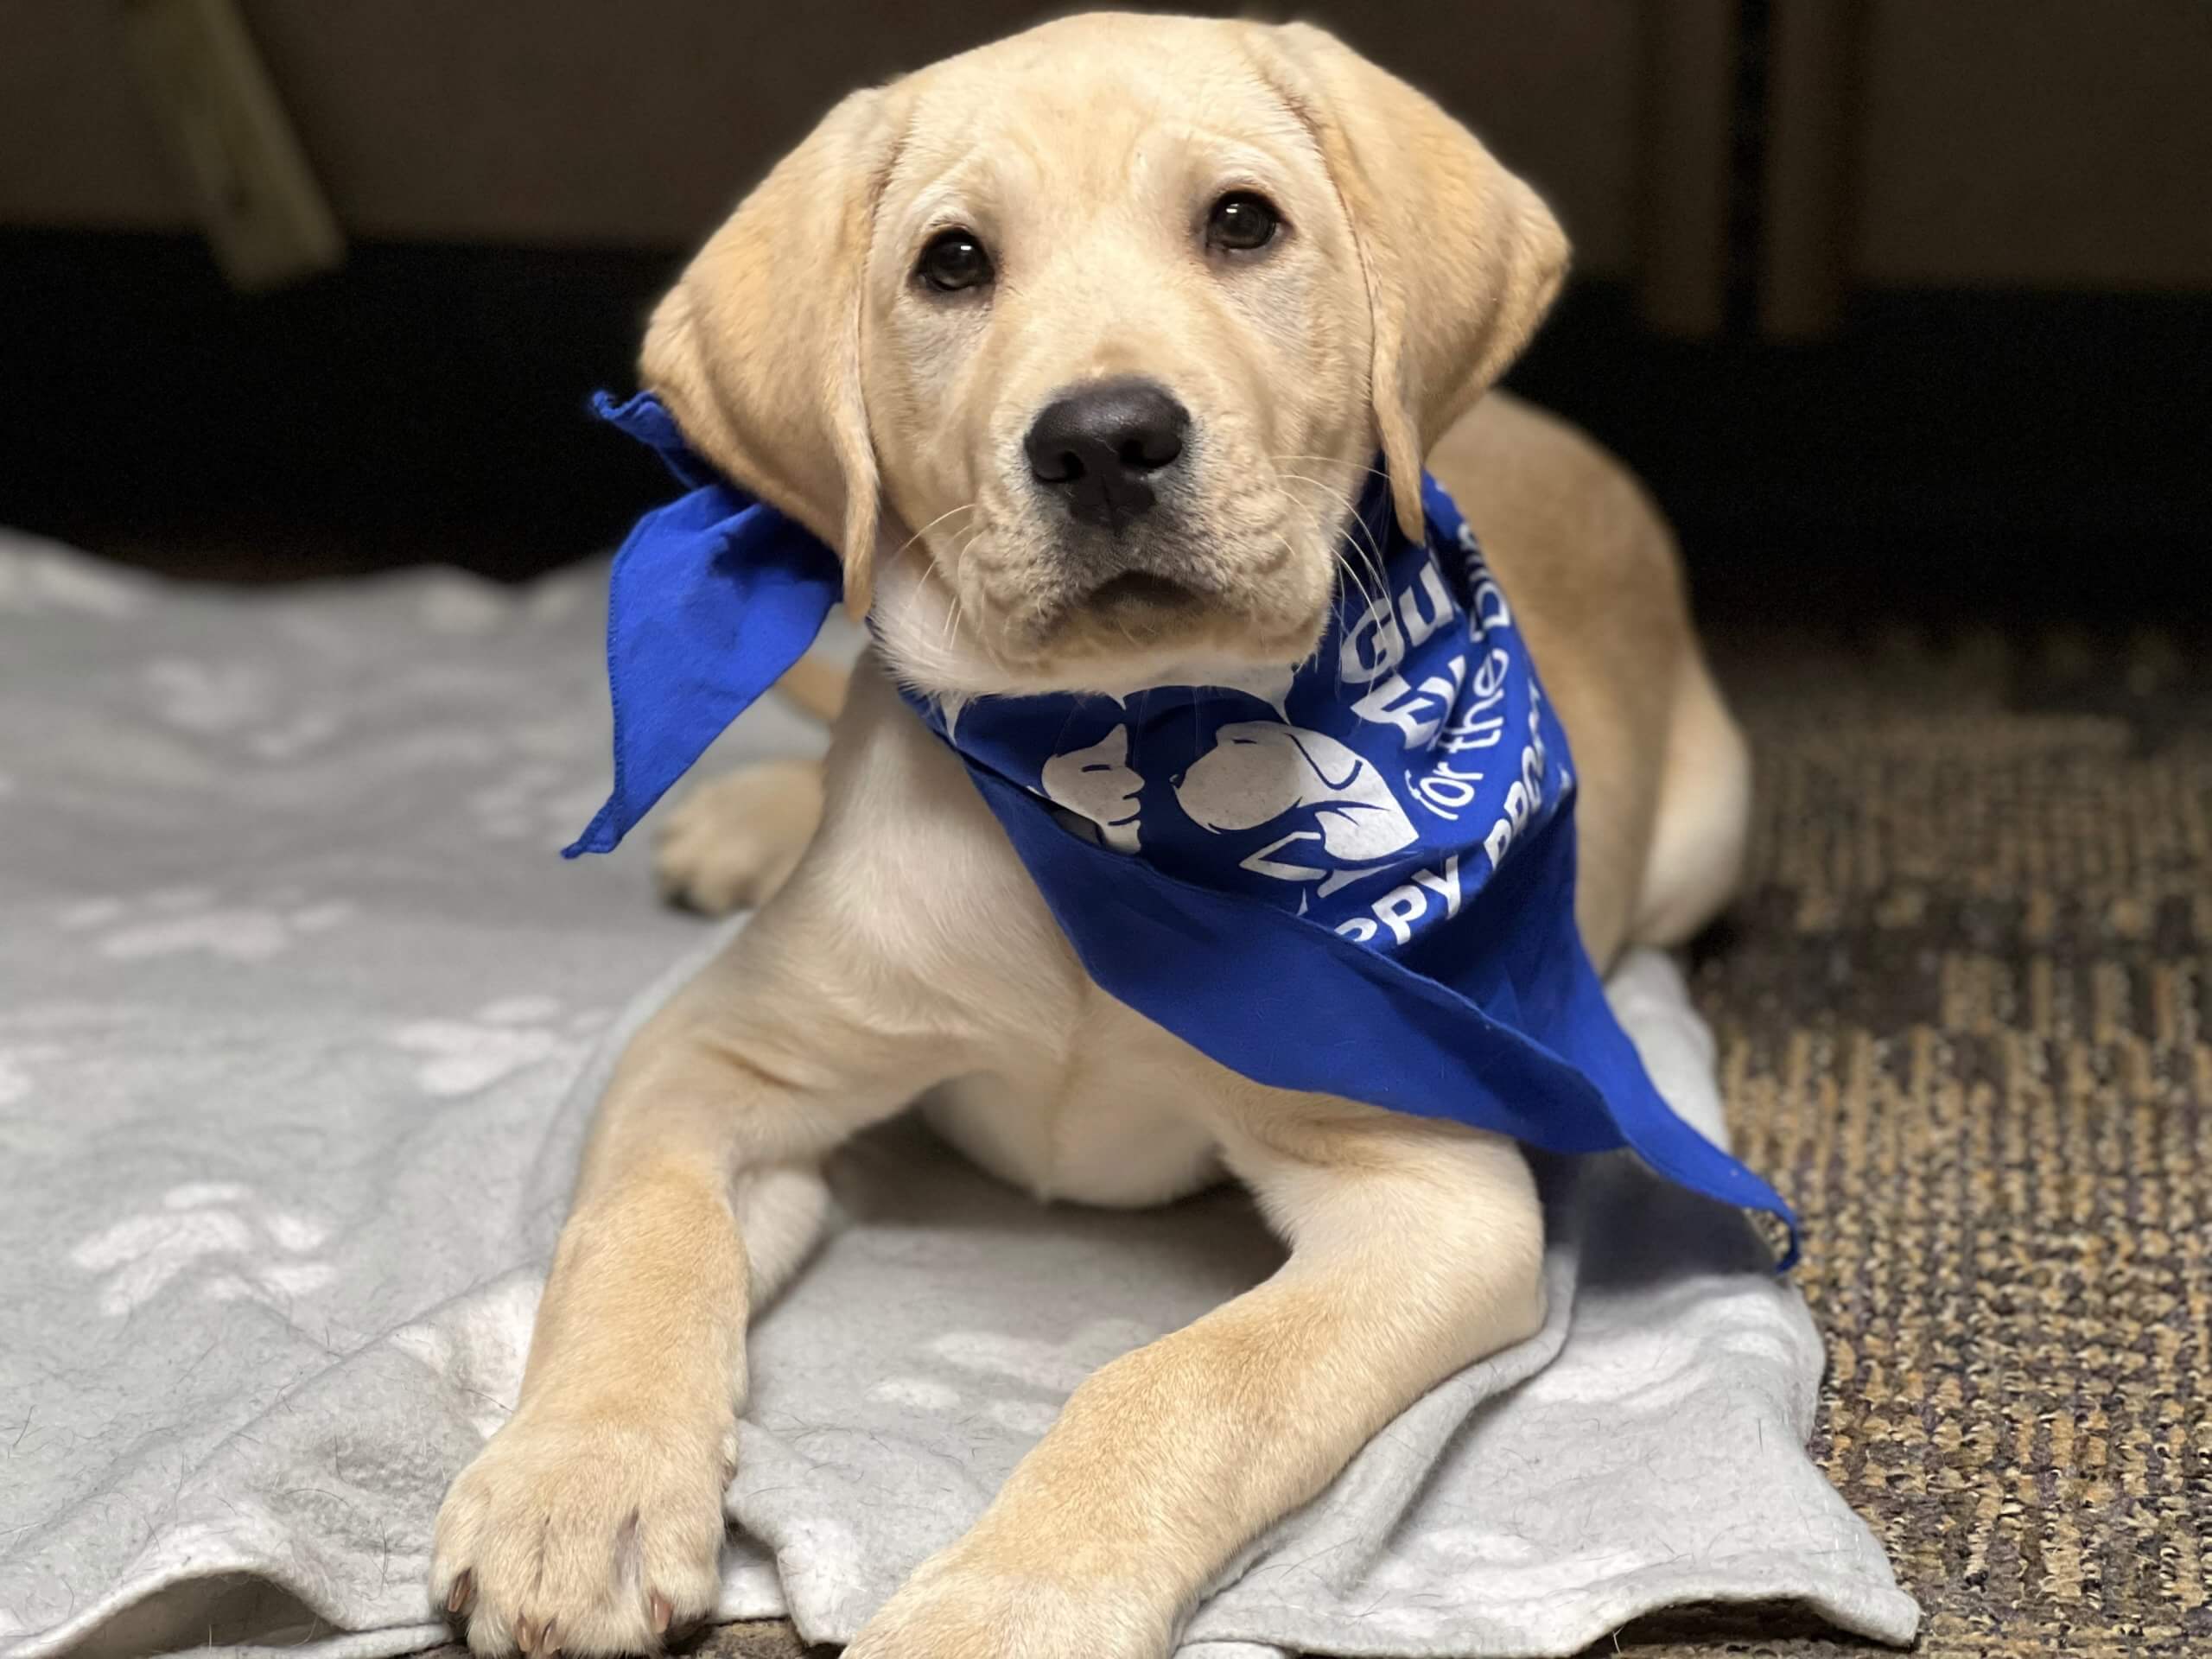 Yellow lab puppy Jenkins lays on a grey dog bed while wearing his blue puppy program bandana.